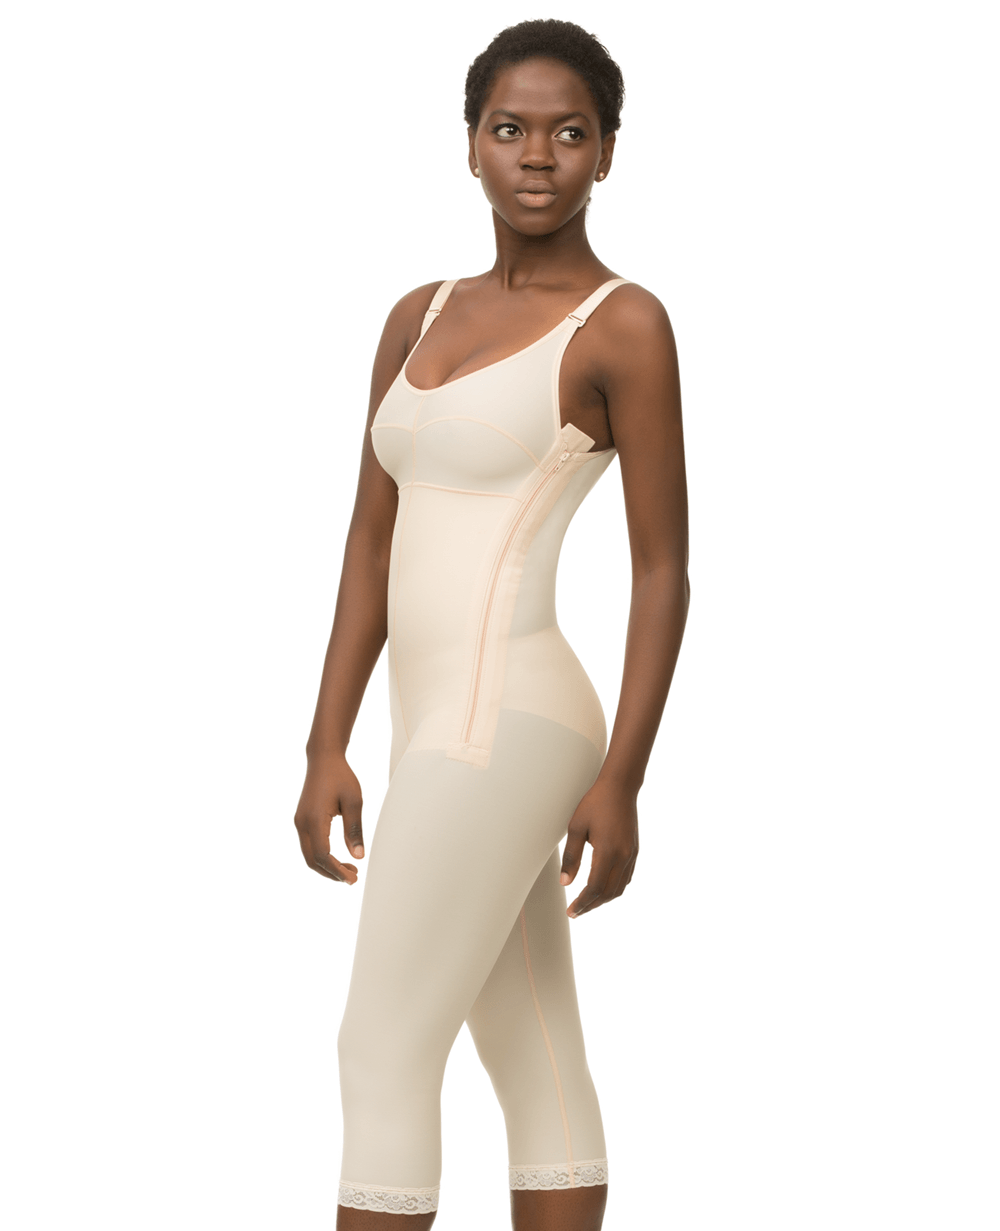 Isavela Womens Body Suit With Suspenders Below Knee Length With